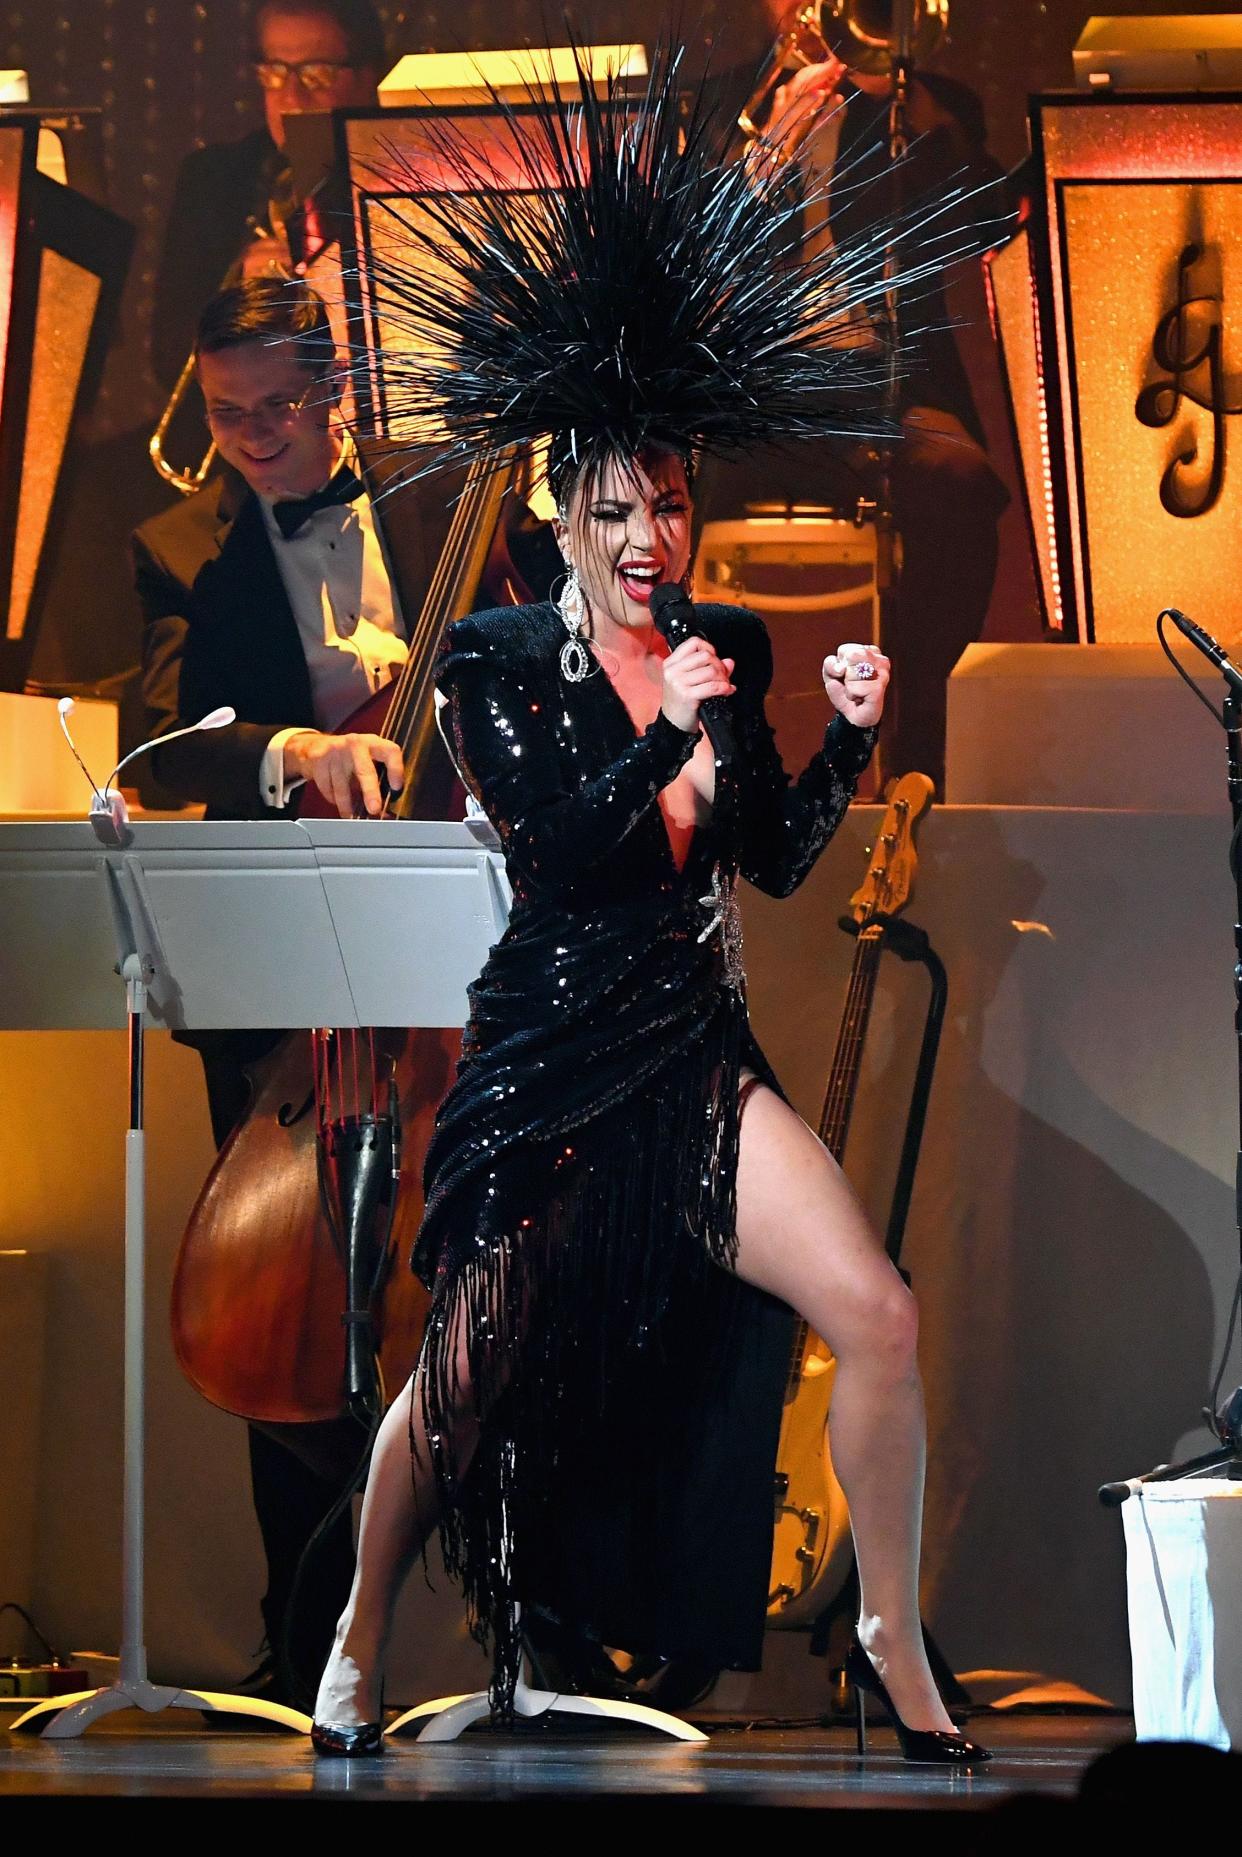 Lady Gaga began her Las Vegas residency, including her "Jazz and Piano" show, in 2018 at the MGM Grand's Dolby Live